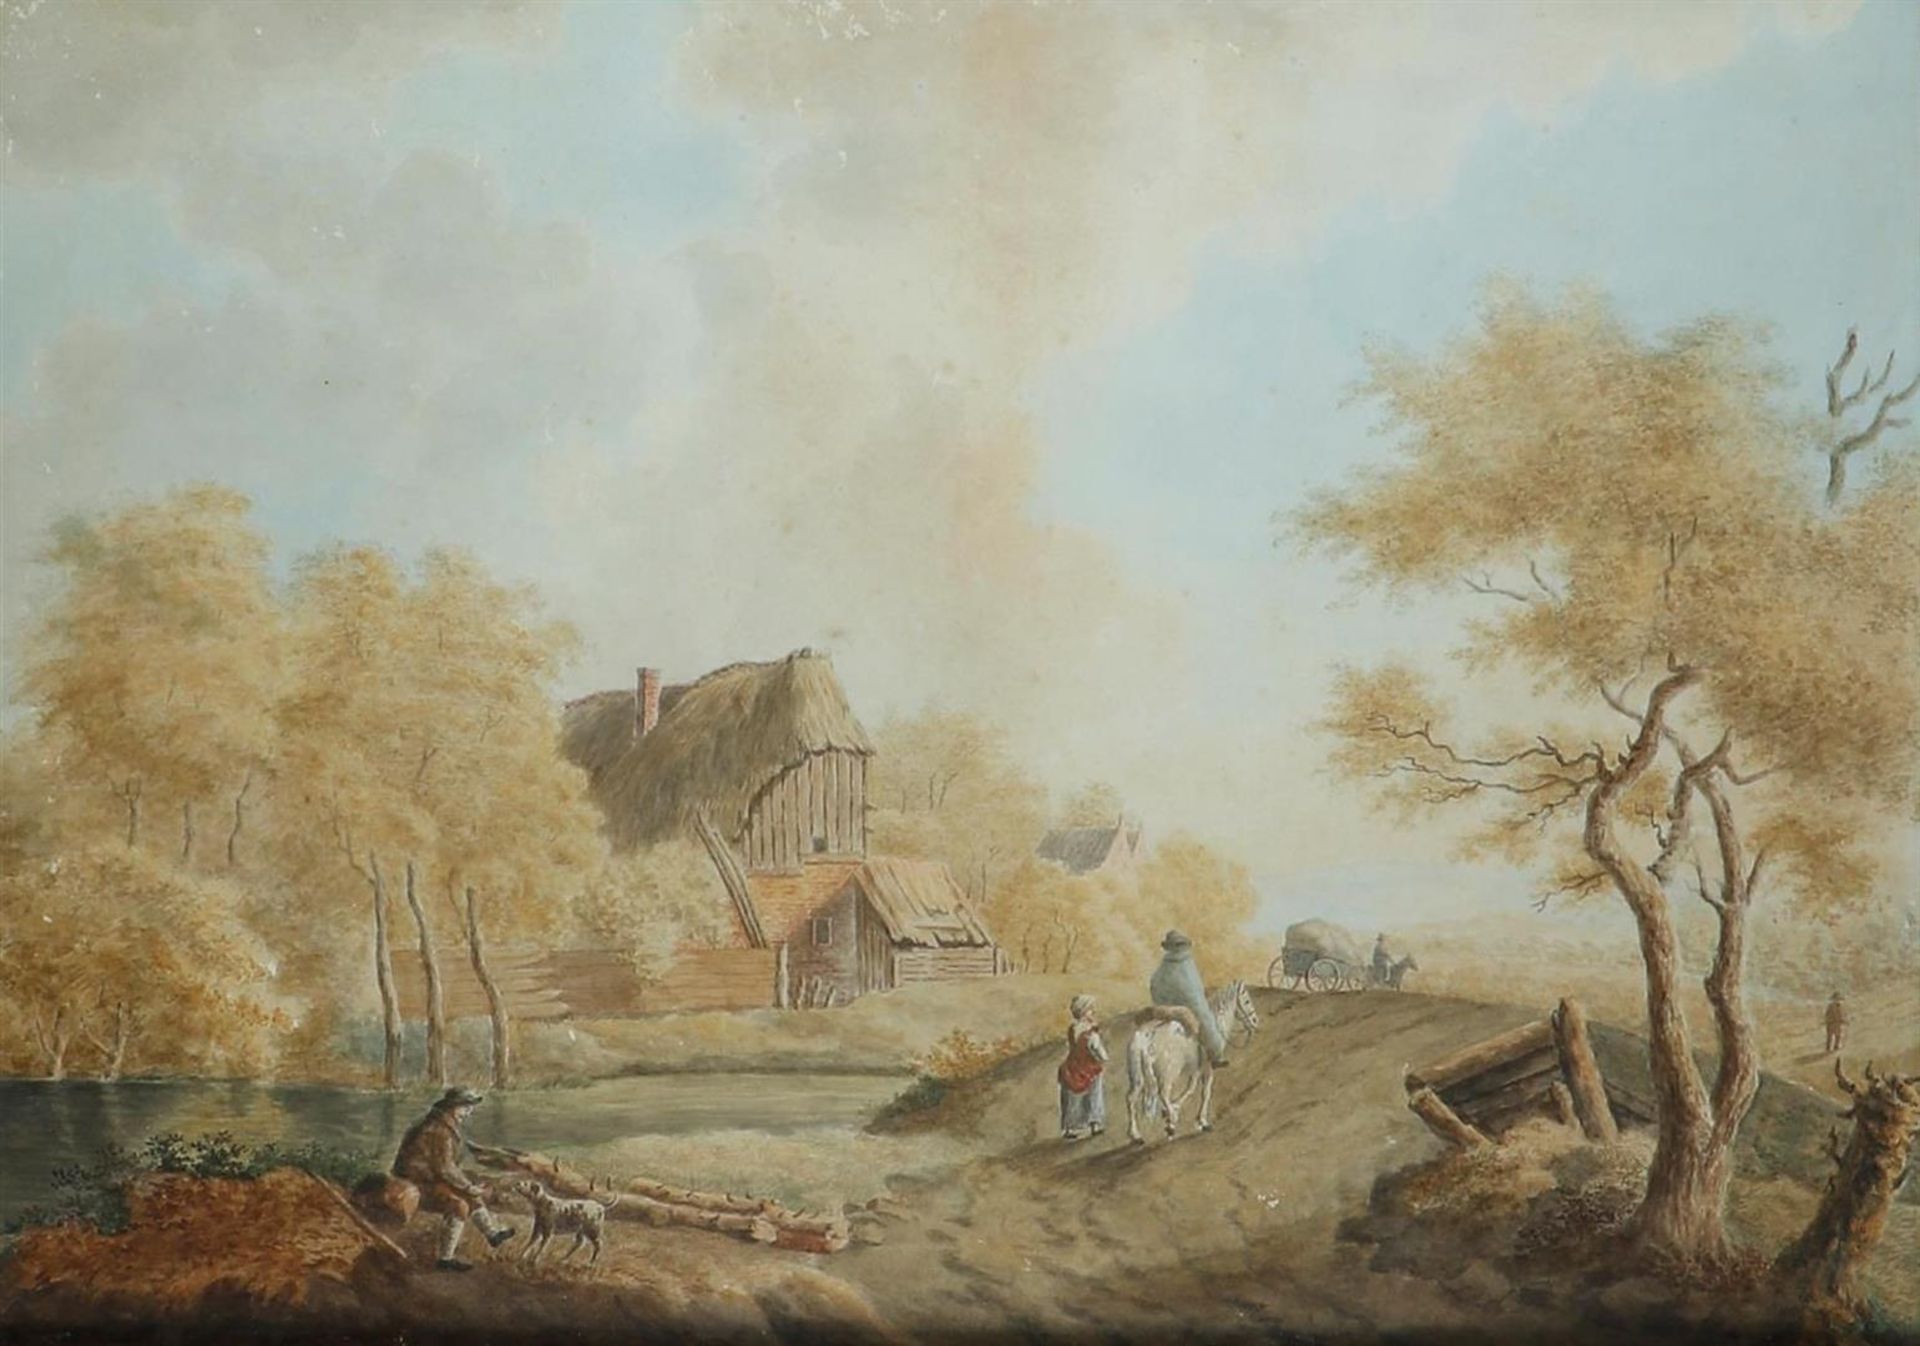 Dutch School, 19th century. Travellers in a river landscape, ca. 1800/1830, watercolor on paper.